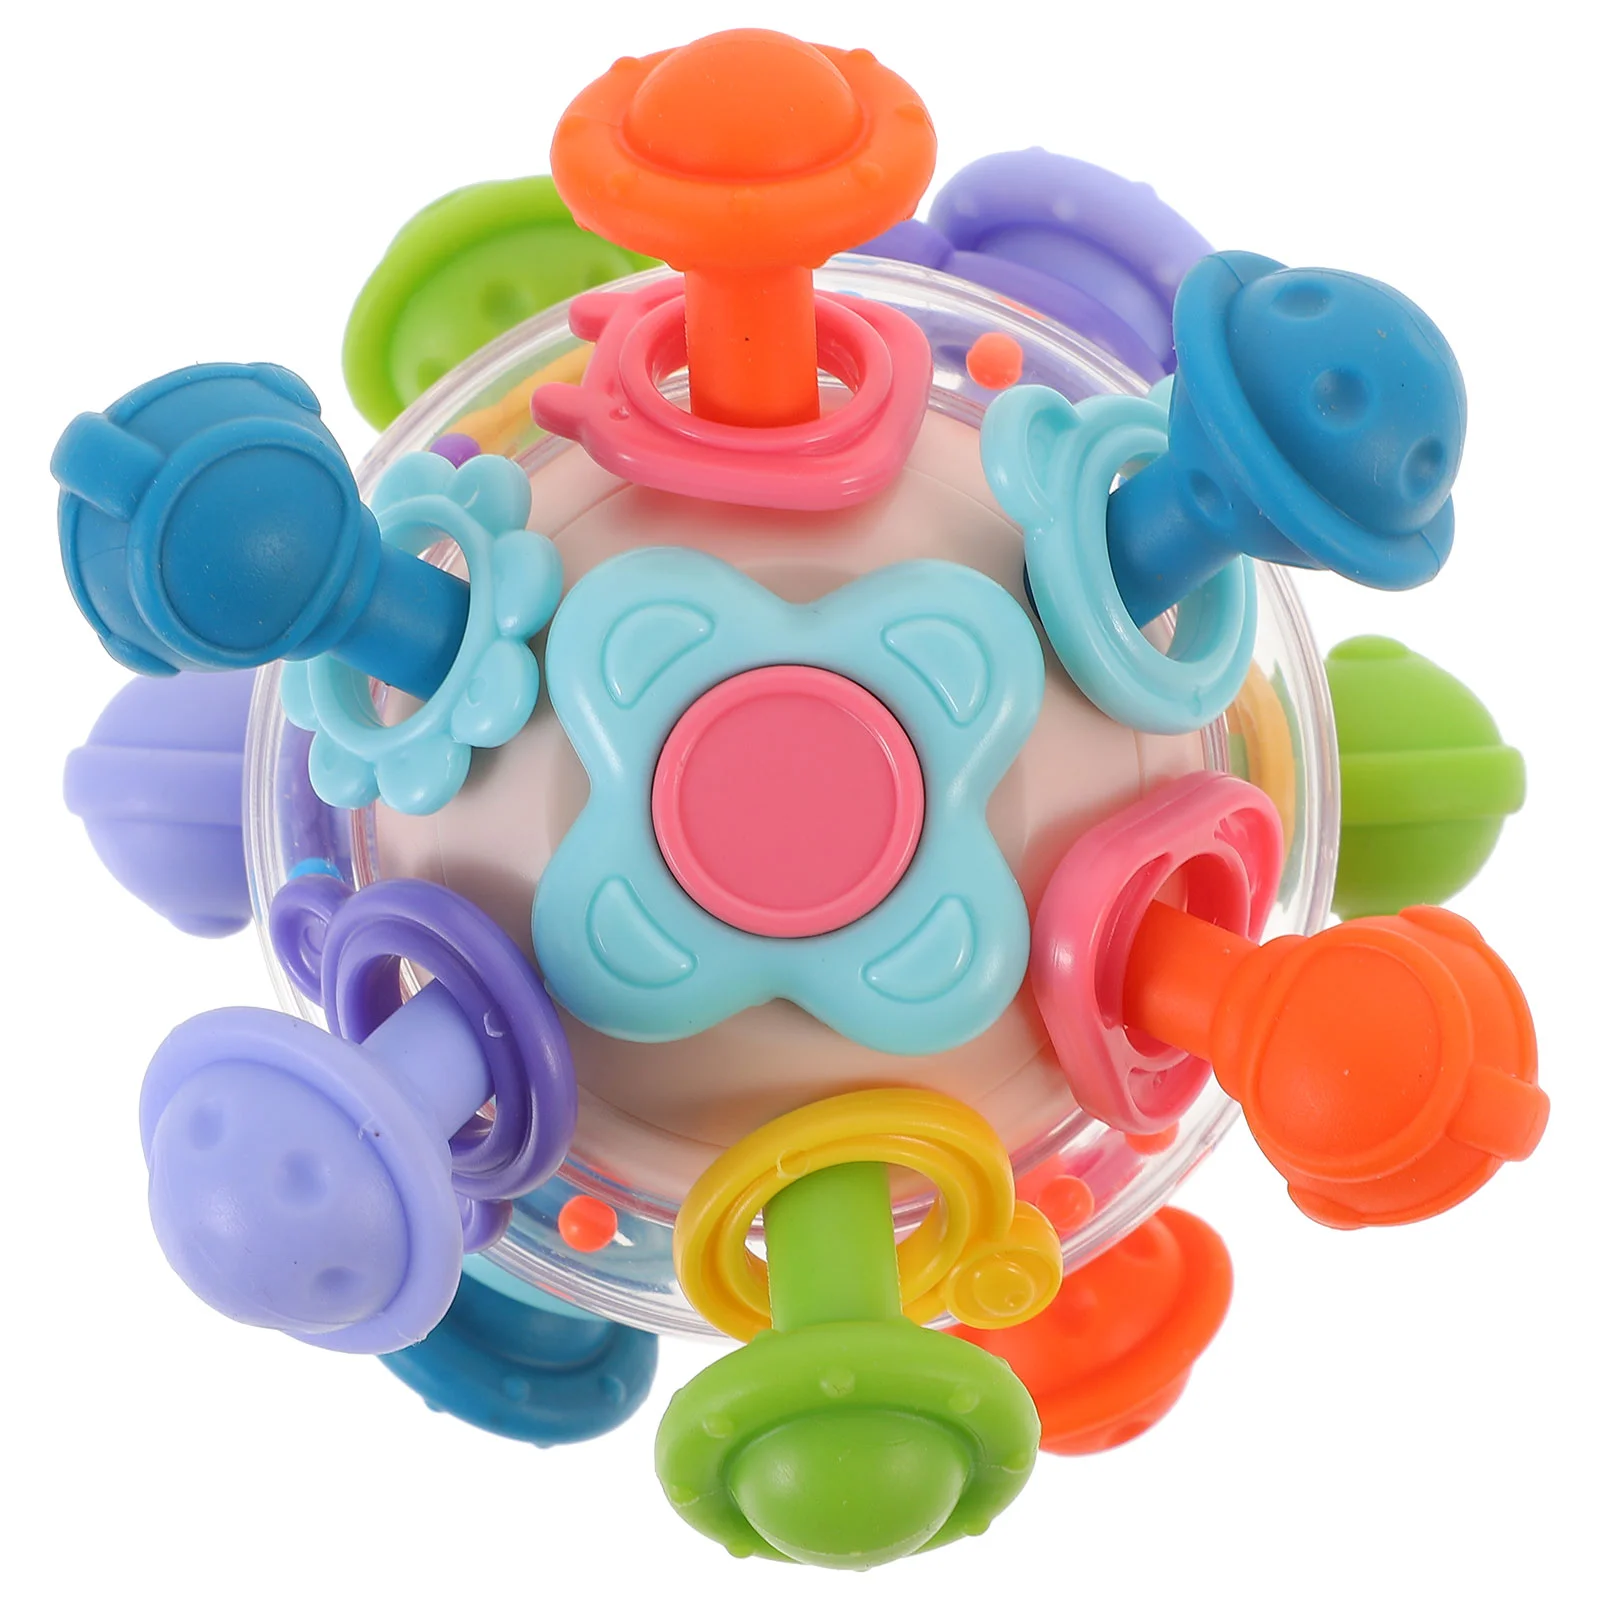 

Kids Toys Manhattan Catch Ball Baby Hand Grip Interactive Educational Chew Sensory Grasping Early Development Stretching